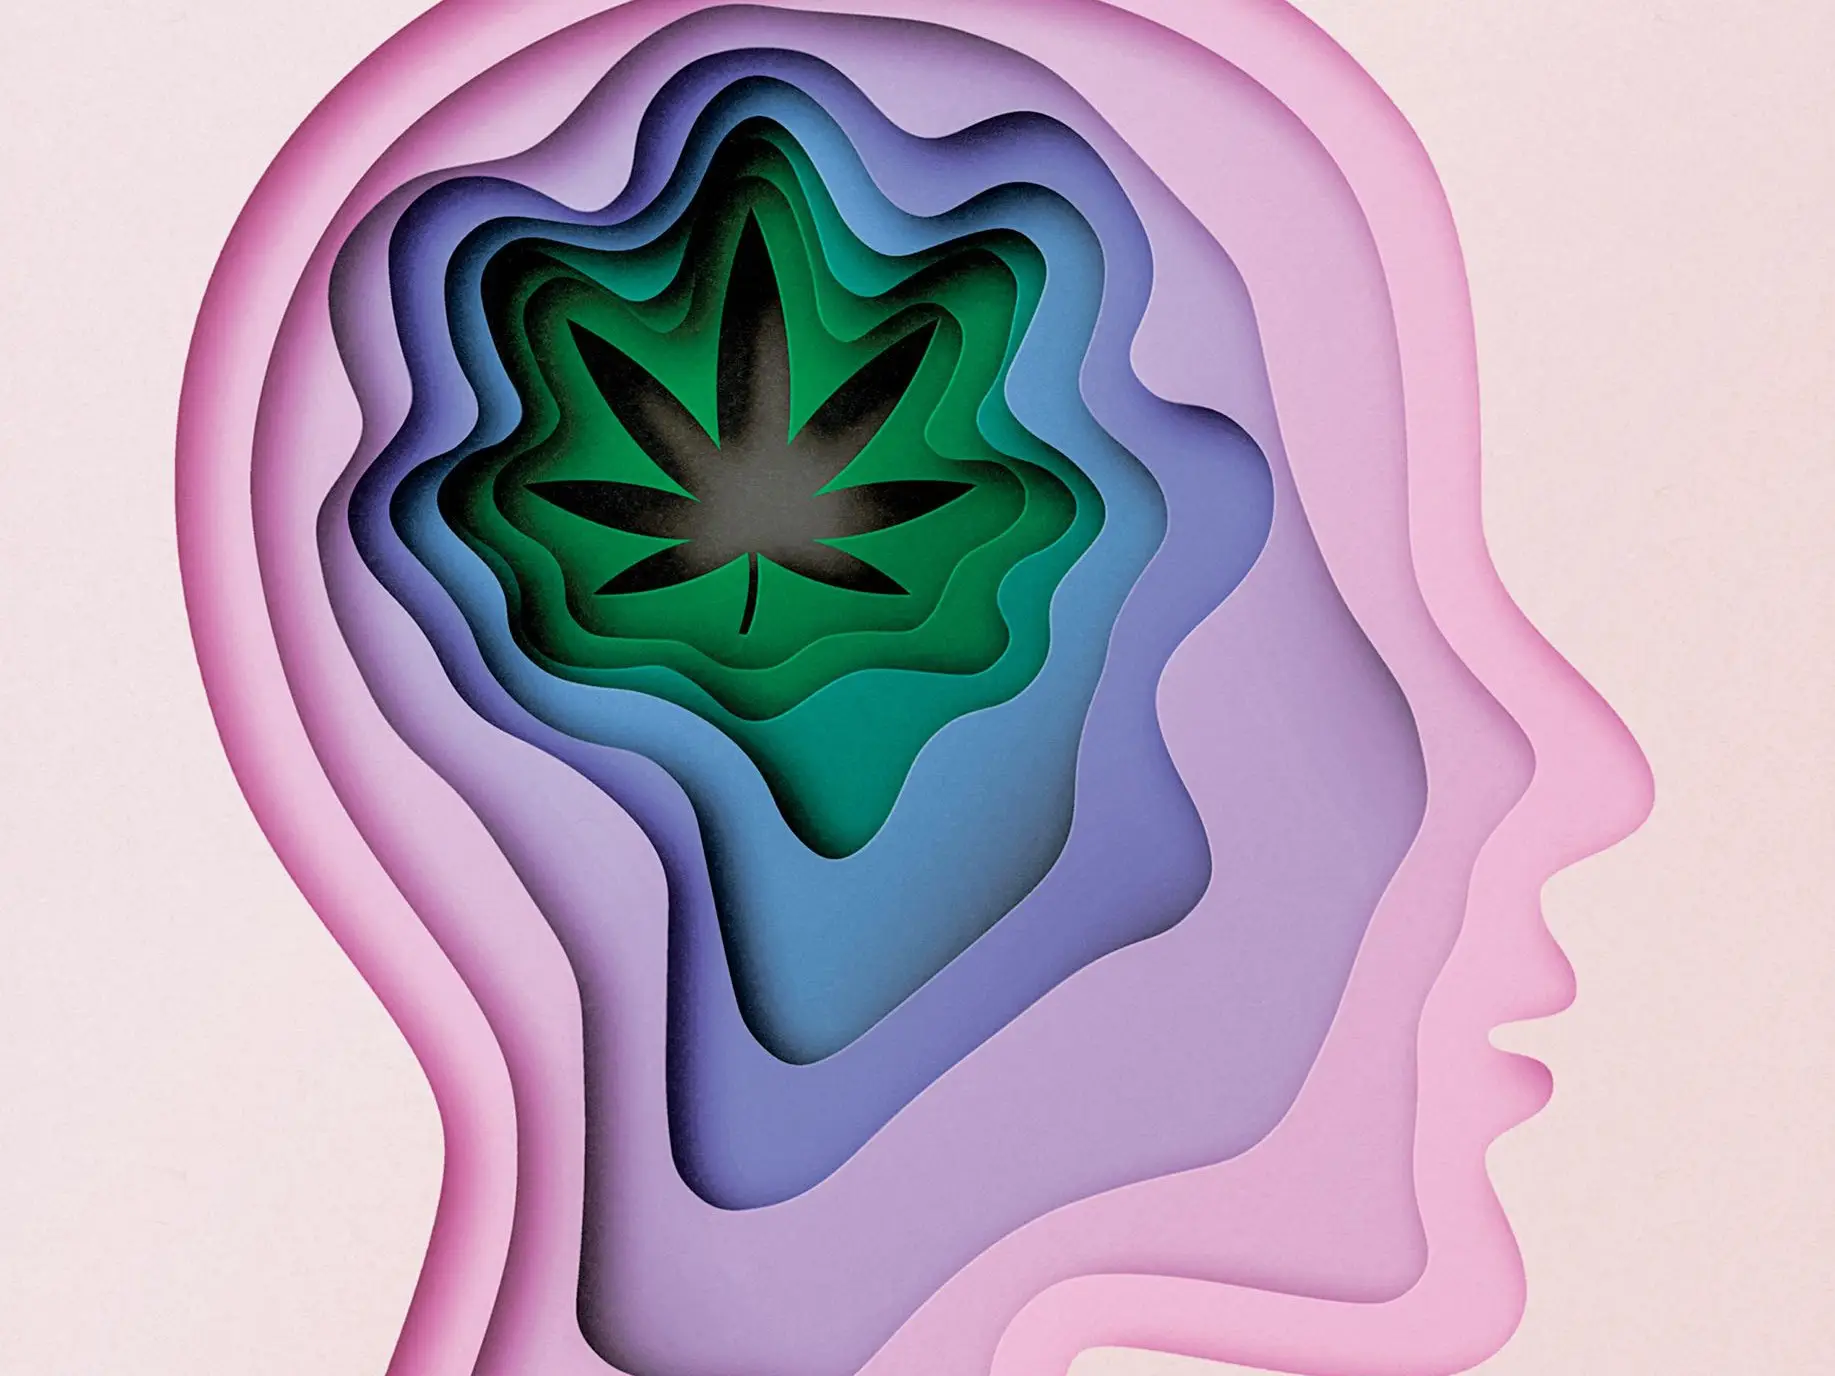 Use of Cannabis Can Affect Your Brain